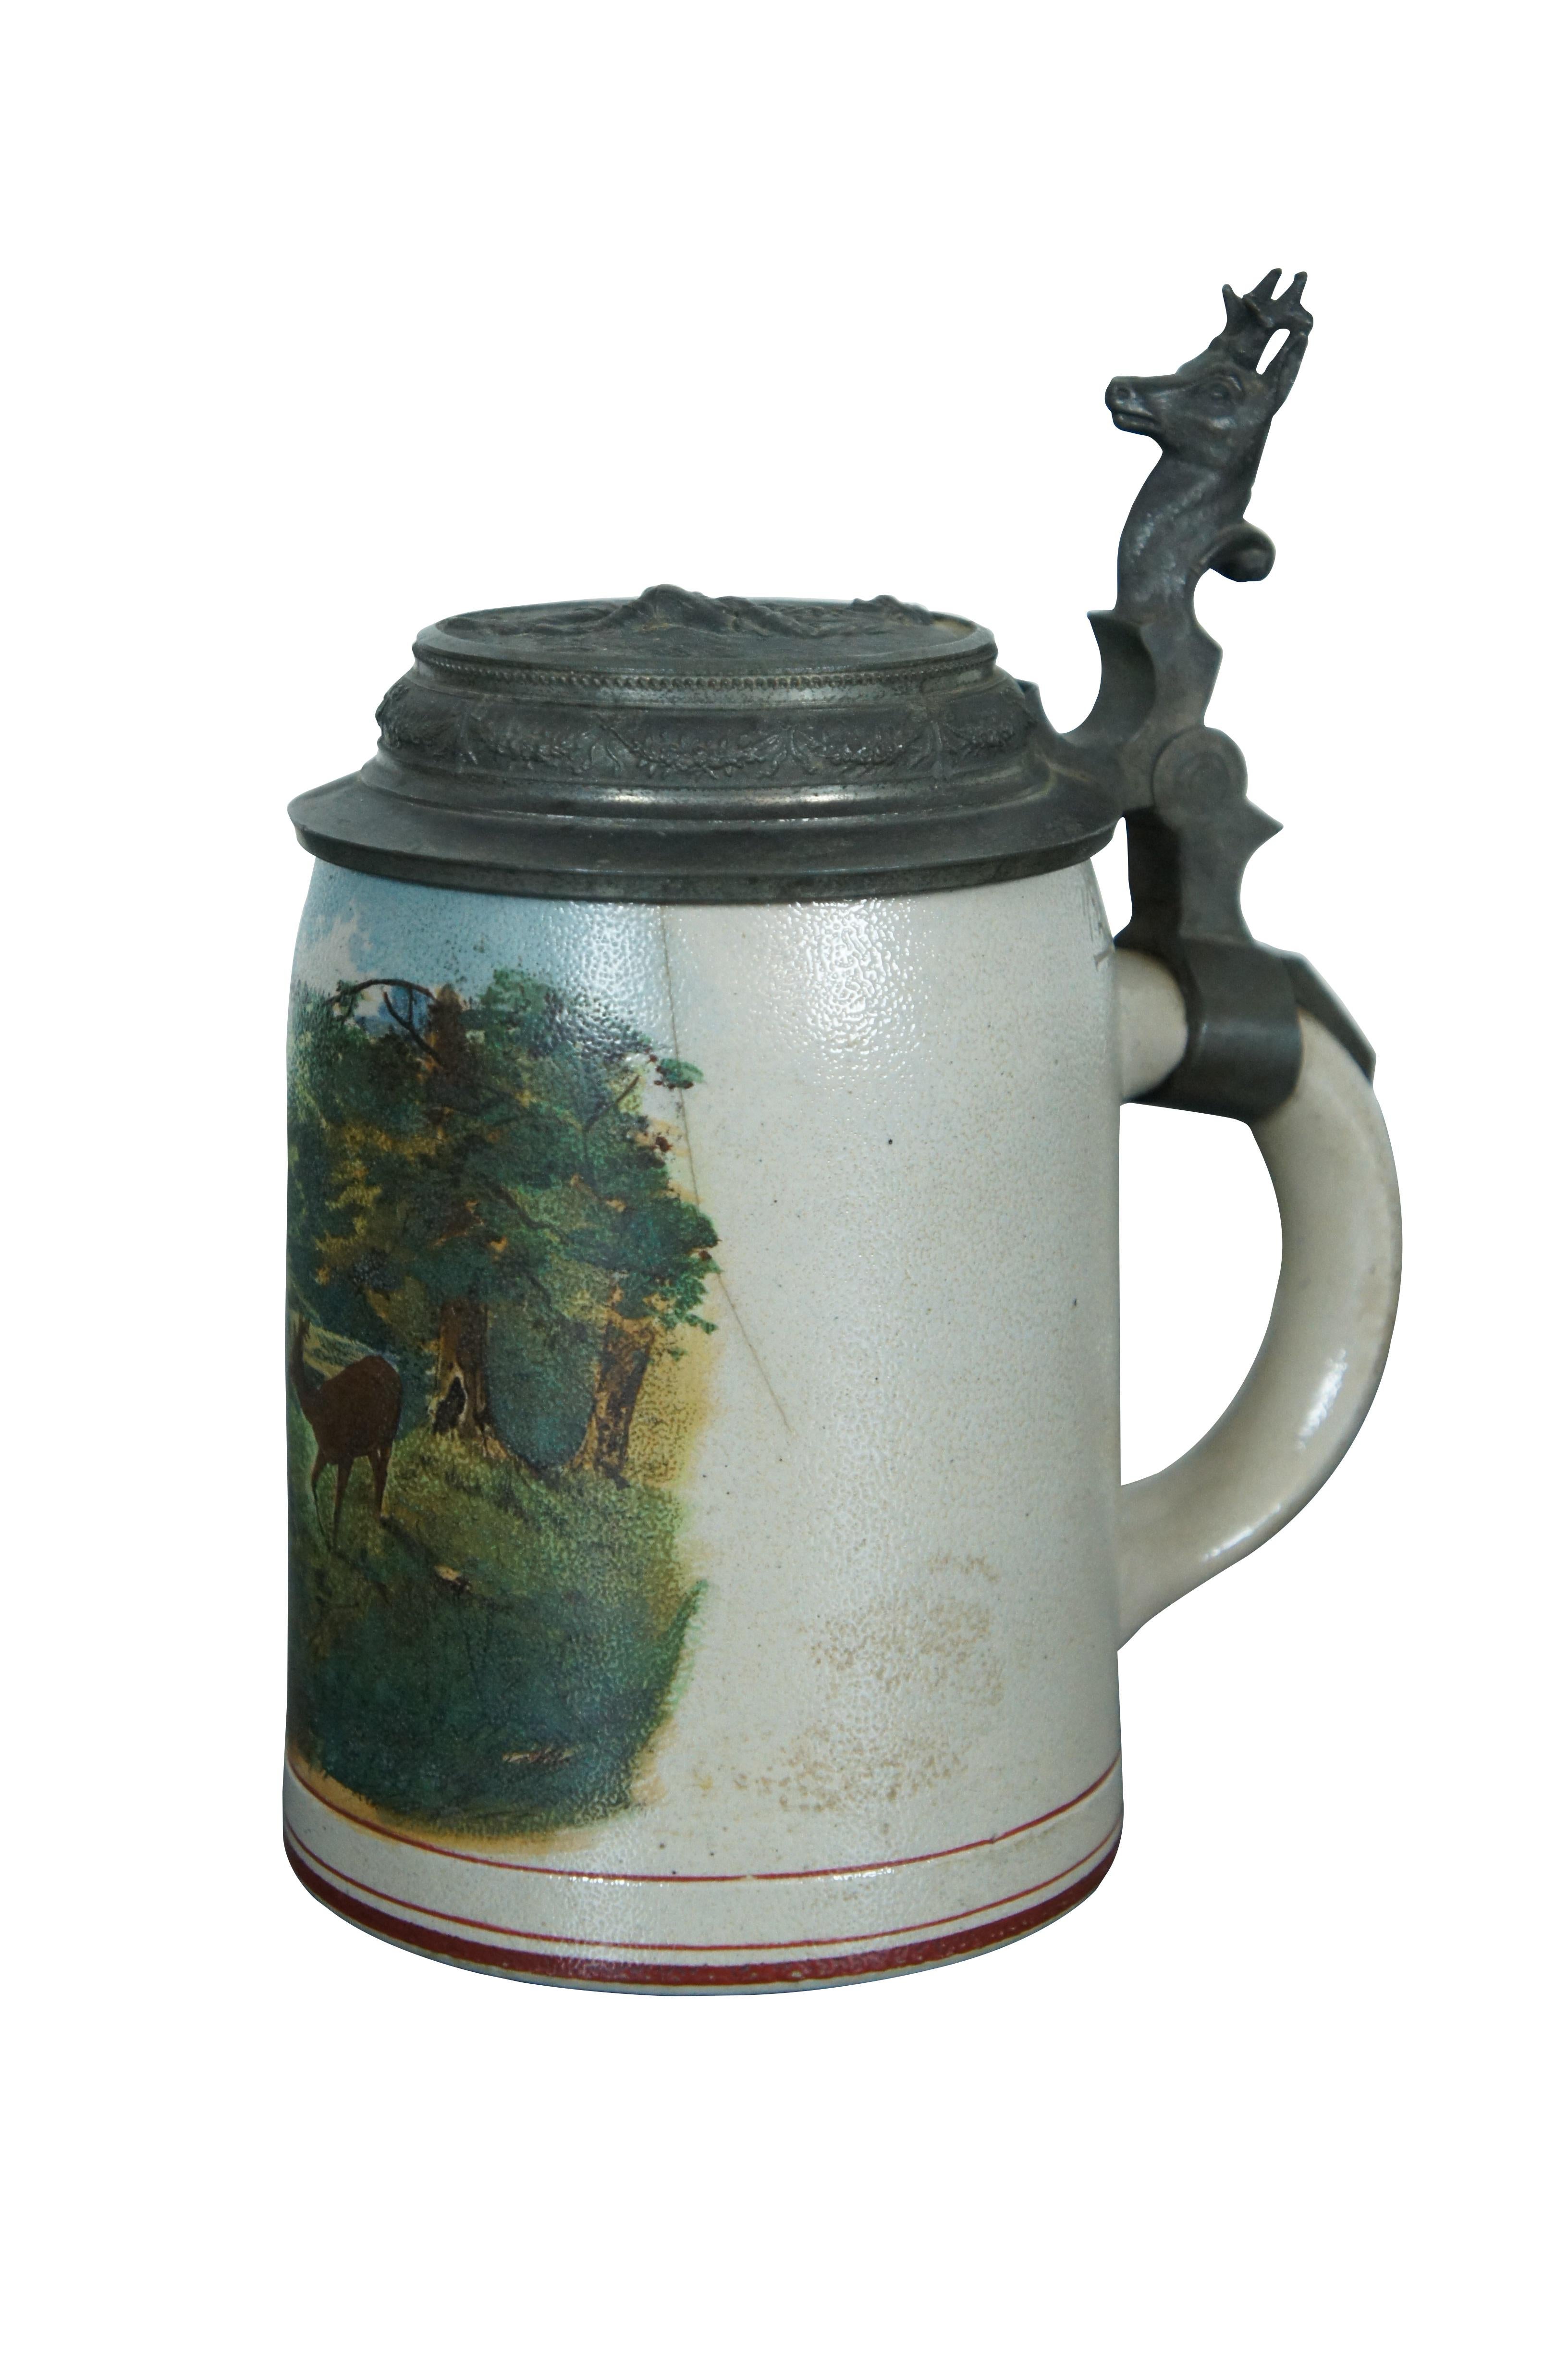 Antique German 1/2 Liter stoneware beer stein featuring a pewter lid with figural stag and landscape scene.

Dimensions:
5.25